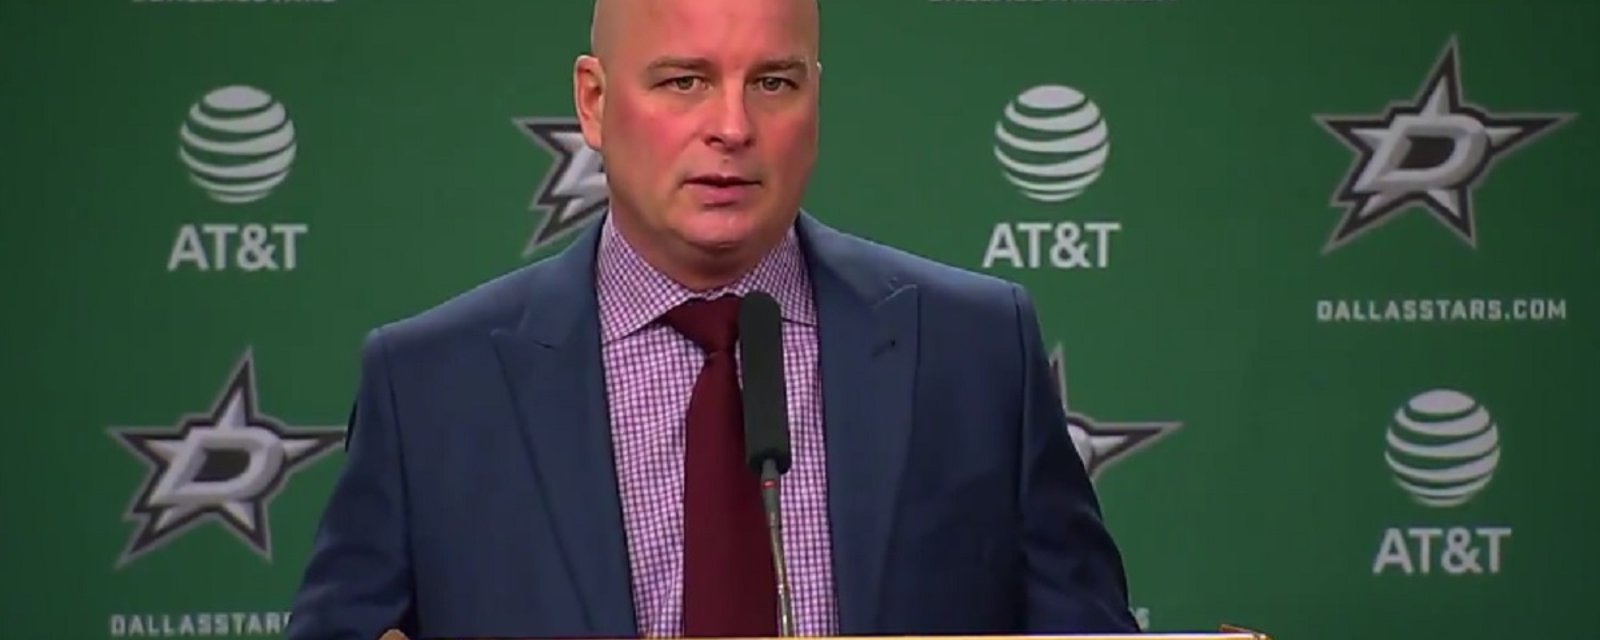 Stars head coach calls out his team in brutally honest press conference.